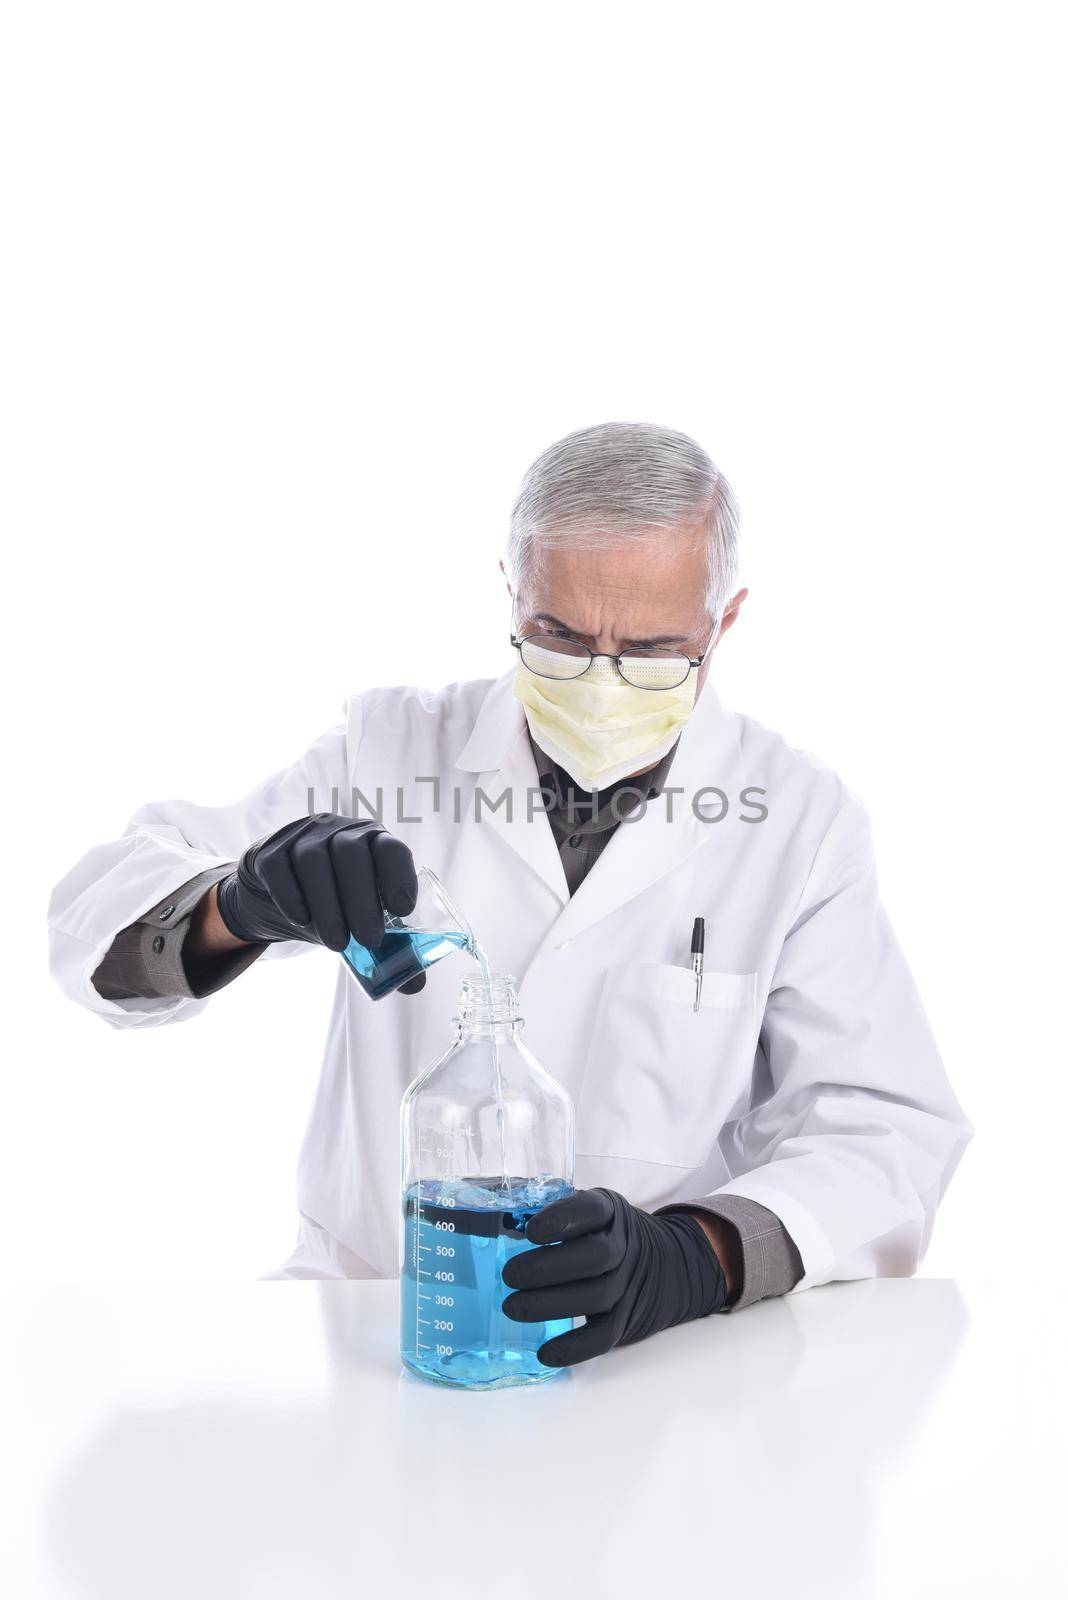 A lab tech pouring liquid from one vessel into another. Man is wearing a protective mask and gloves, isolated on white. by sCukrov